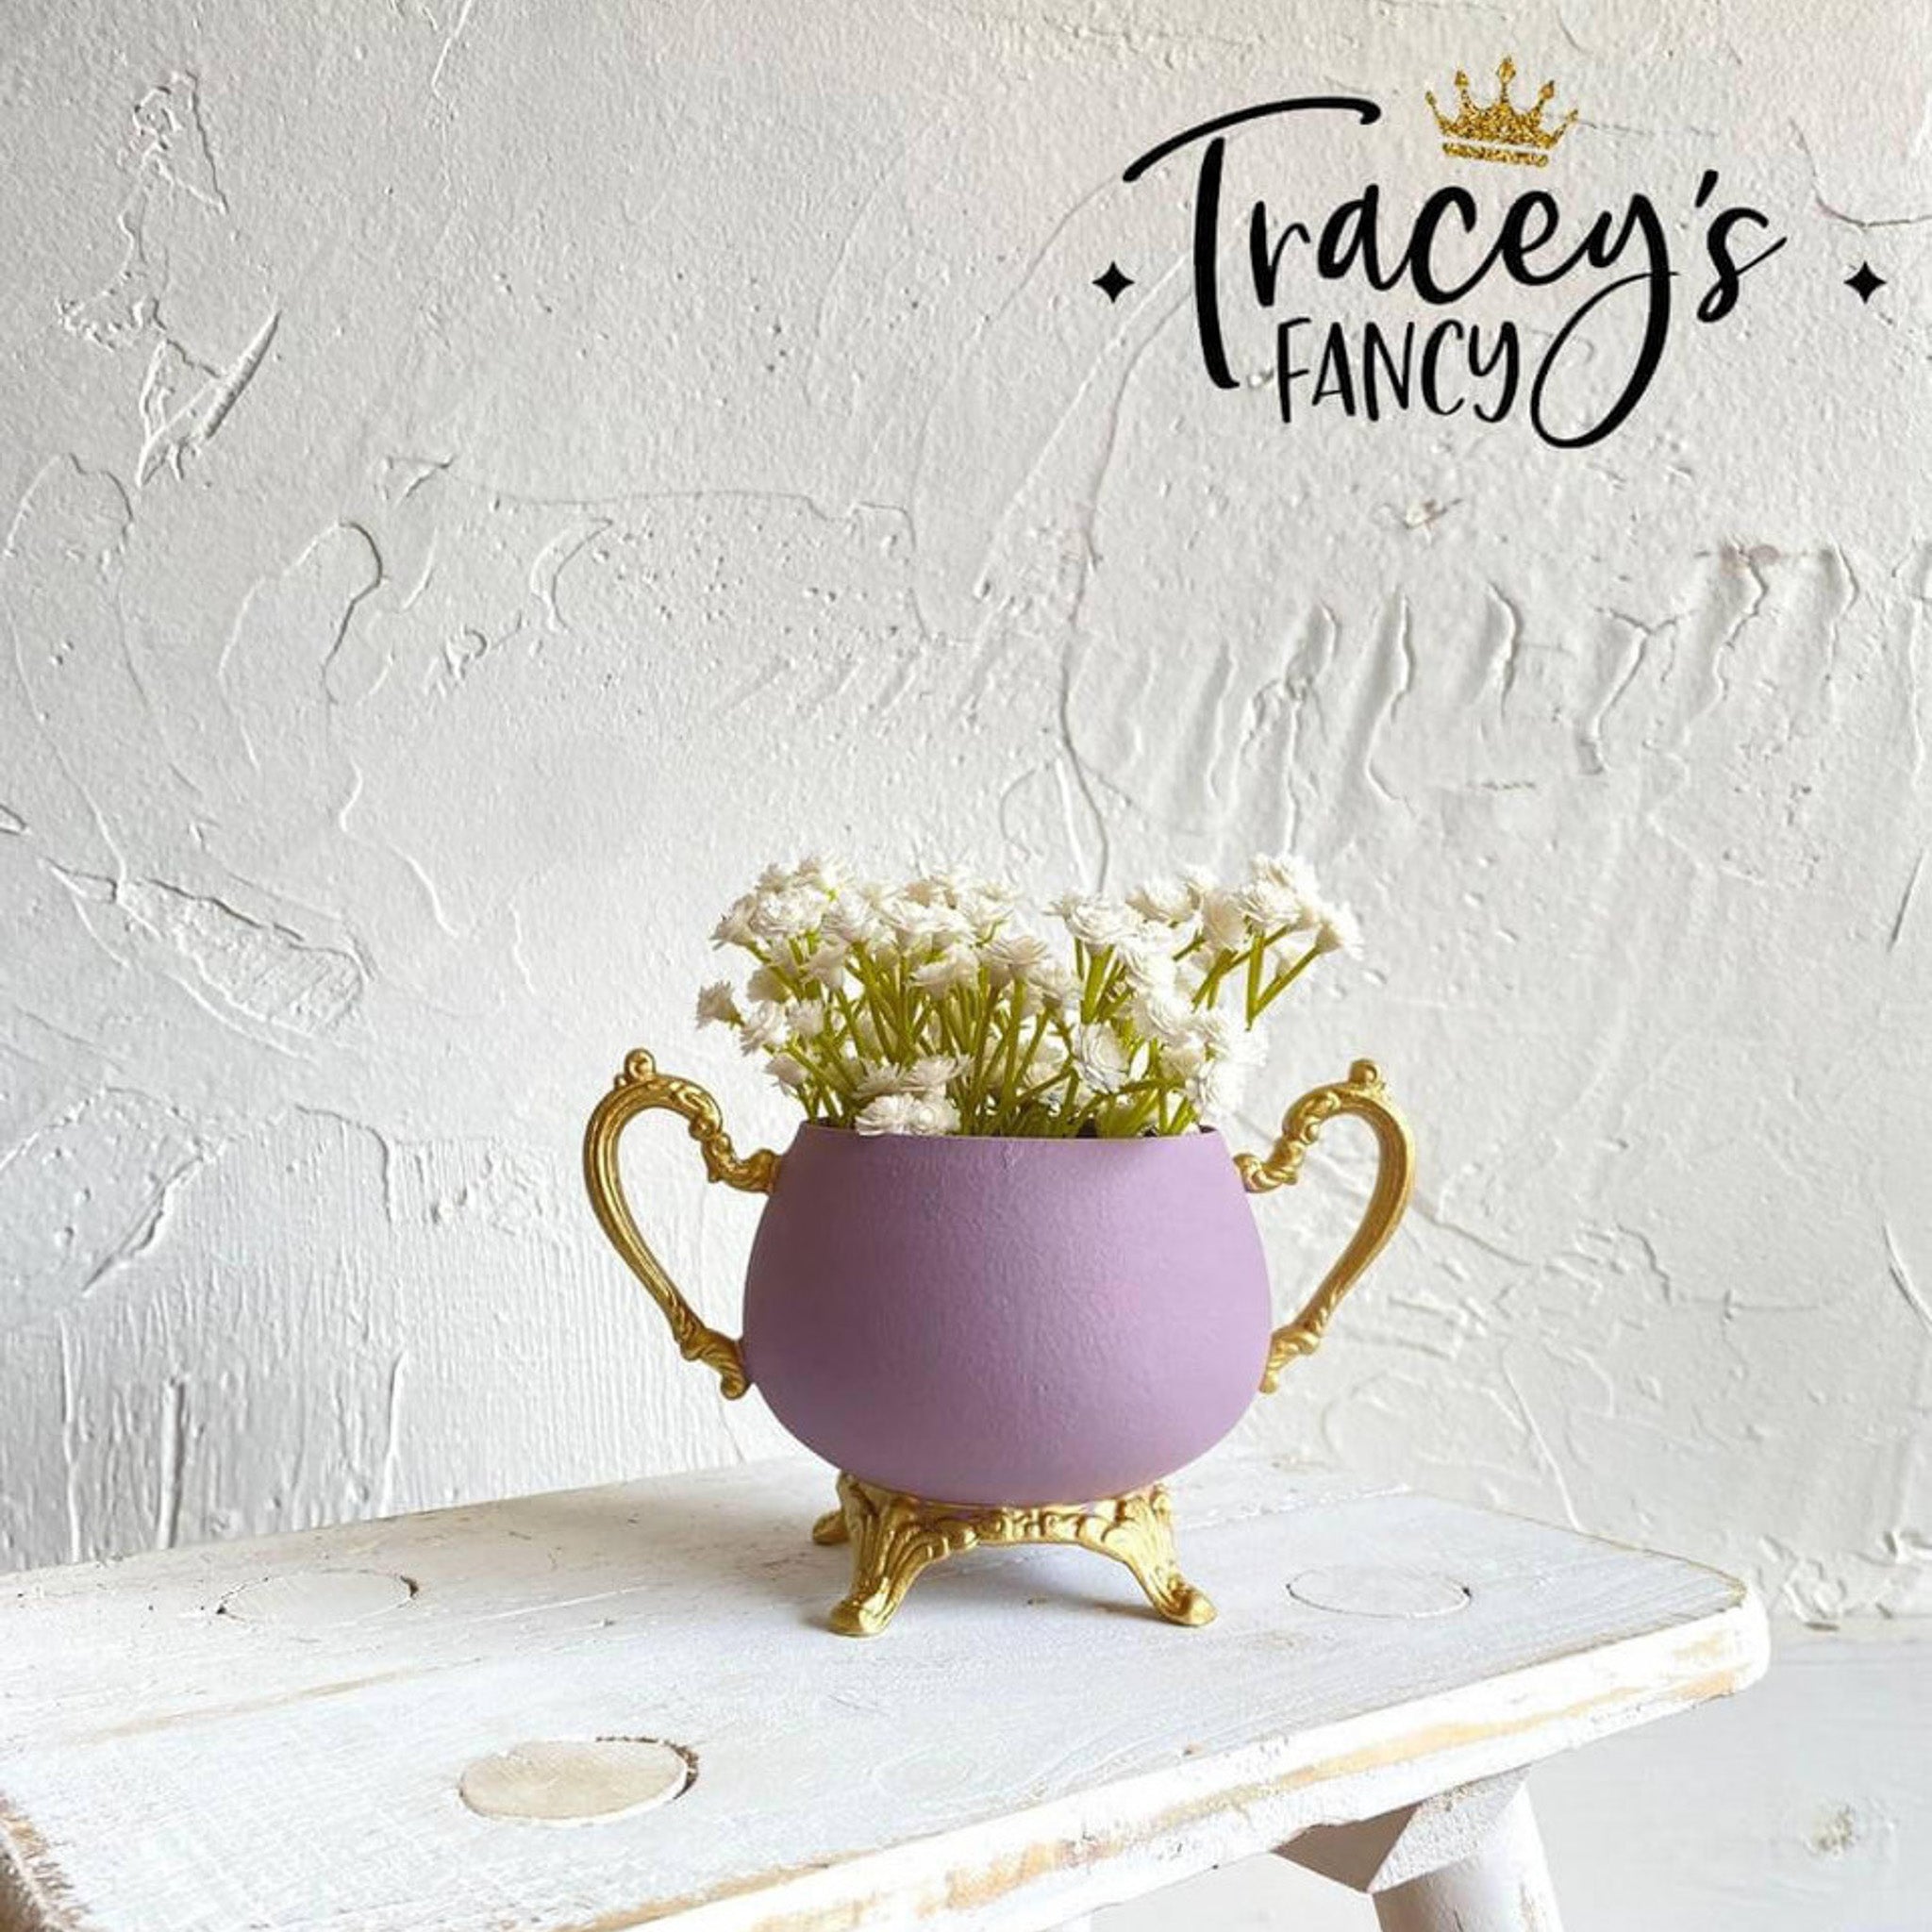 A ceramic vase refurbished by Tracey's Fancy is painted in Dixie Belle's Secret Path chalk mineral paint and has gold-painted legs and handleshandle.